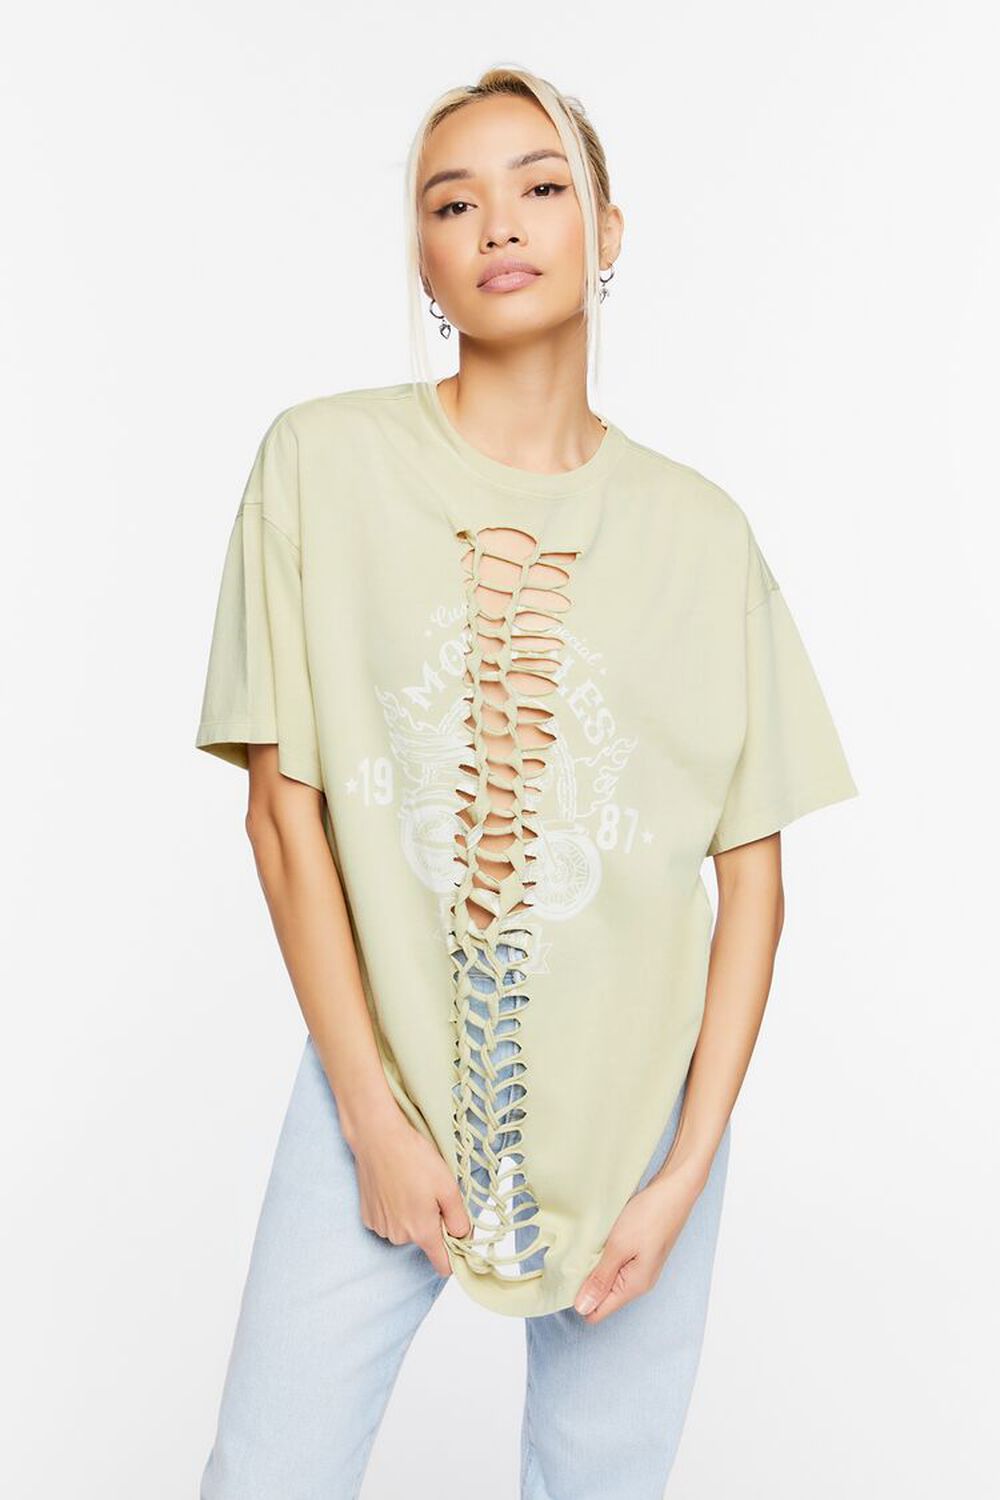 BEIGE/WHITE Knotted Motorcyle Graphic Tunic, image 1